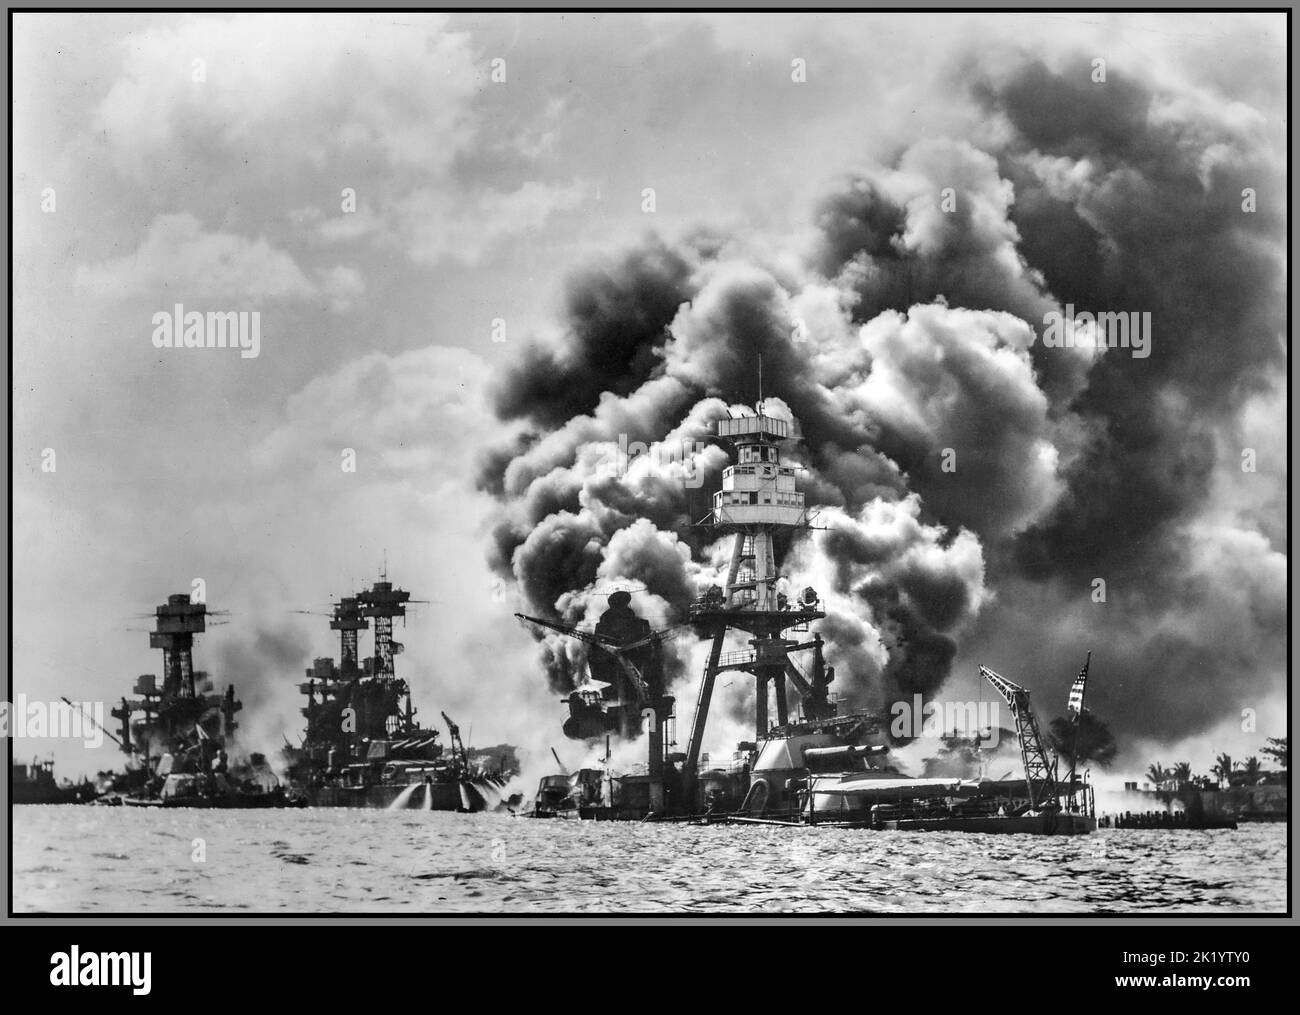 PEARL HARBOR ATTACK Aftermath of a Japanese sneak attack on these three stricken U.S. battleships; from left to right: USS West Virginia (severely damaged), USS Tennessee (damaged), and the USS Arizona (sunk)  Pearl Harbor (Oahu, Honolulu county, Hawaii, United States, North and Central America) harbor  Date 7 December 1941 Stock Photo